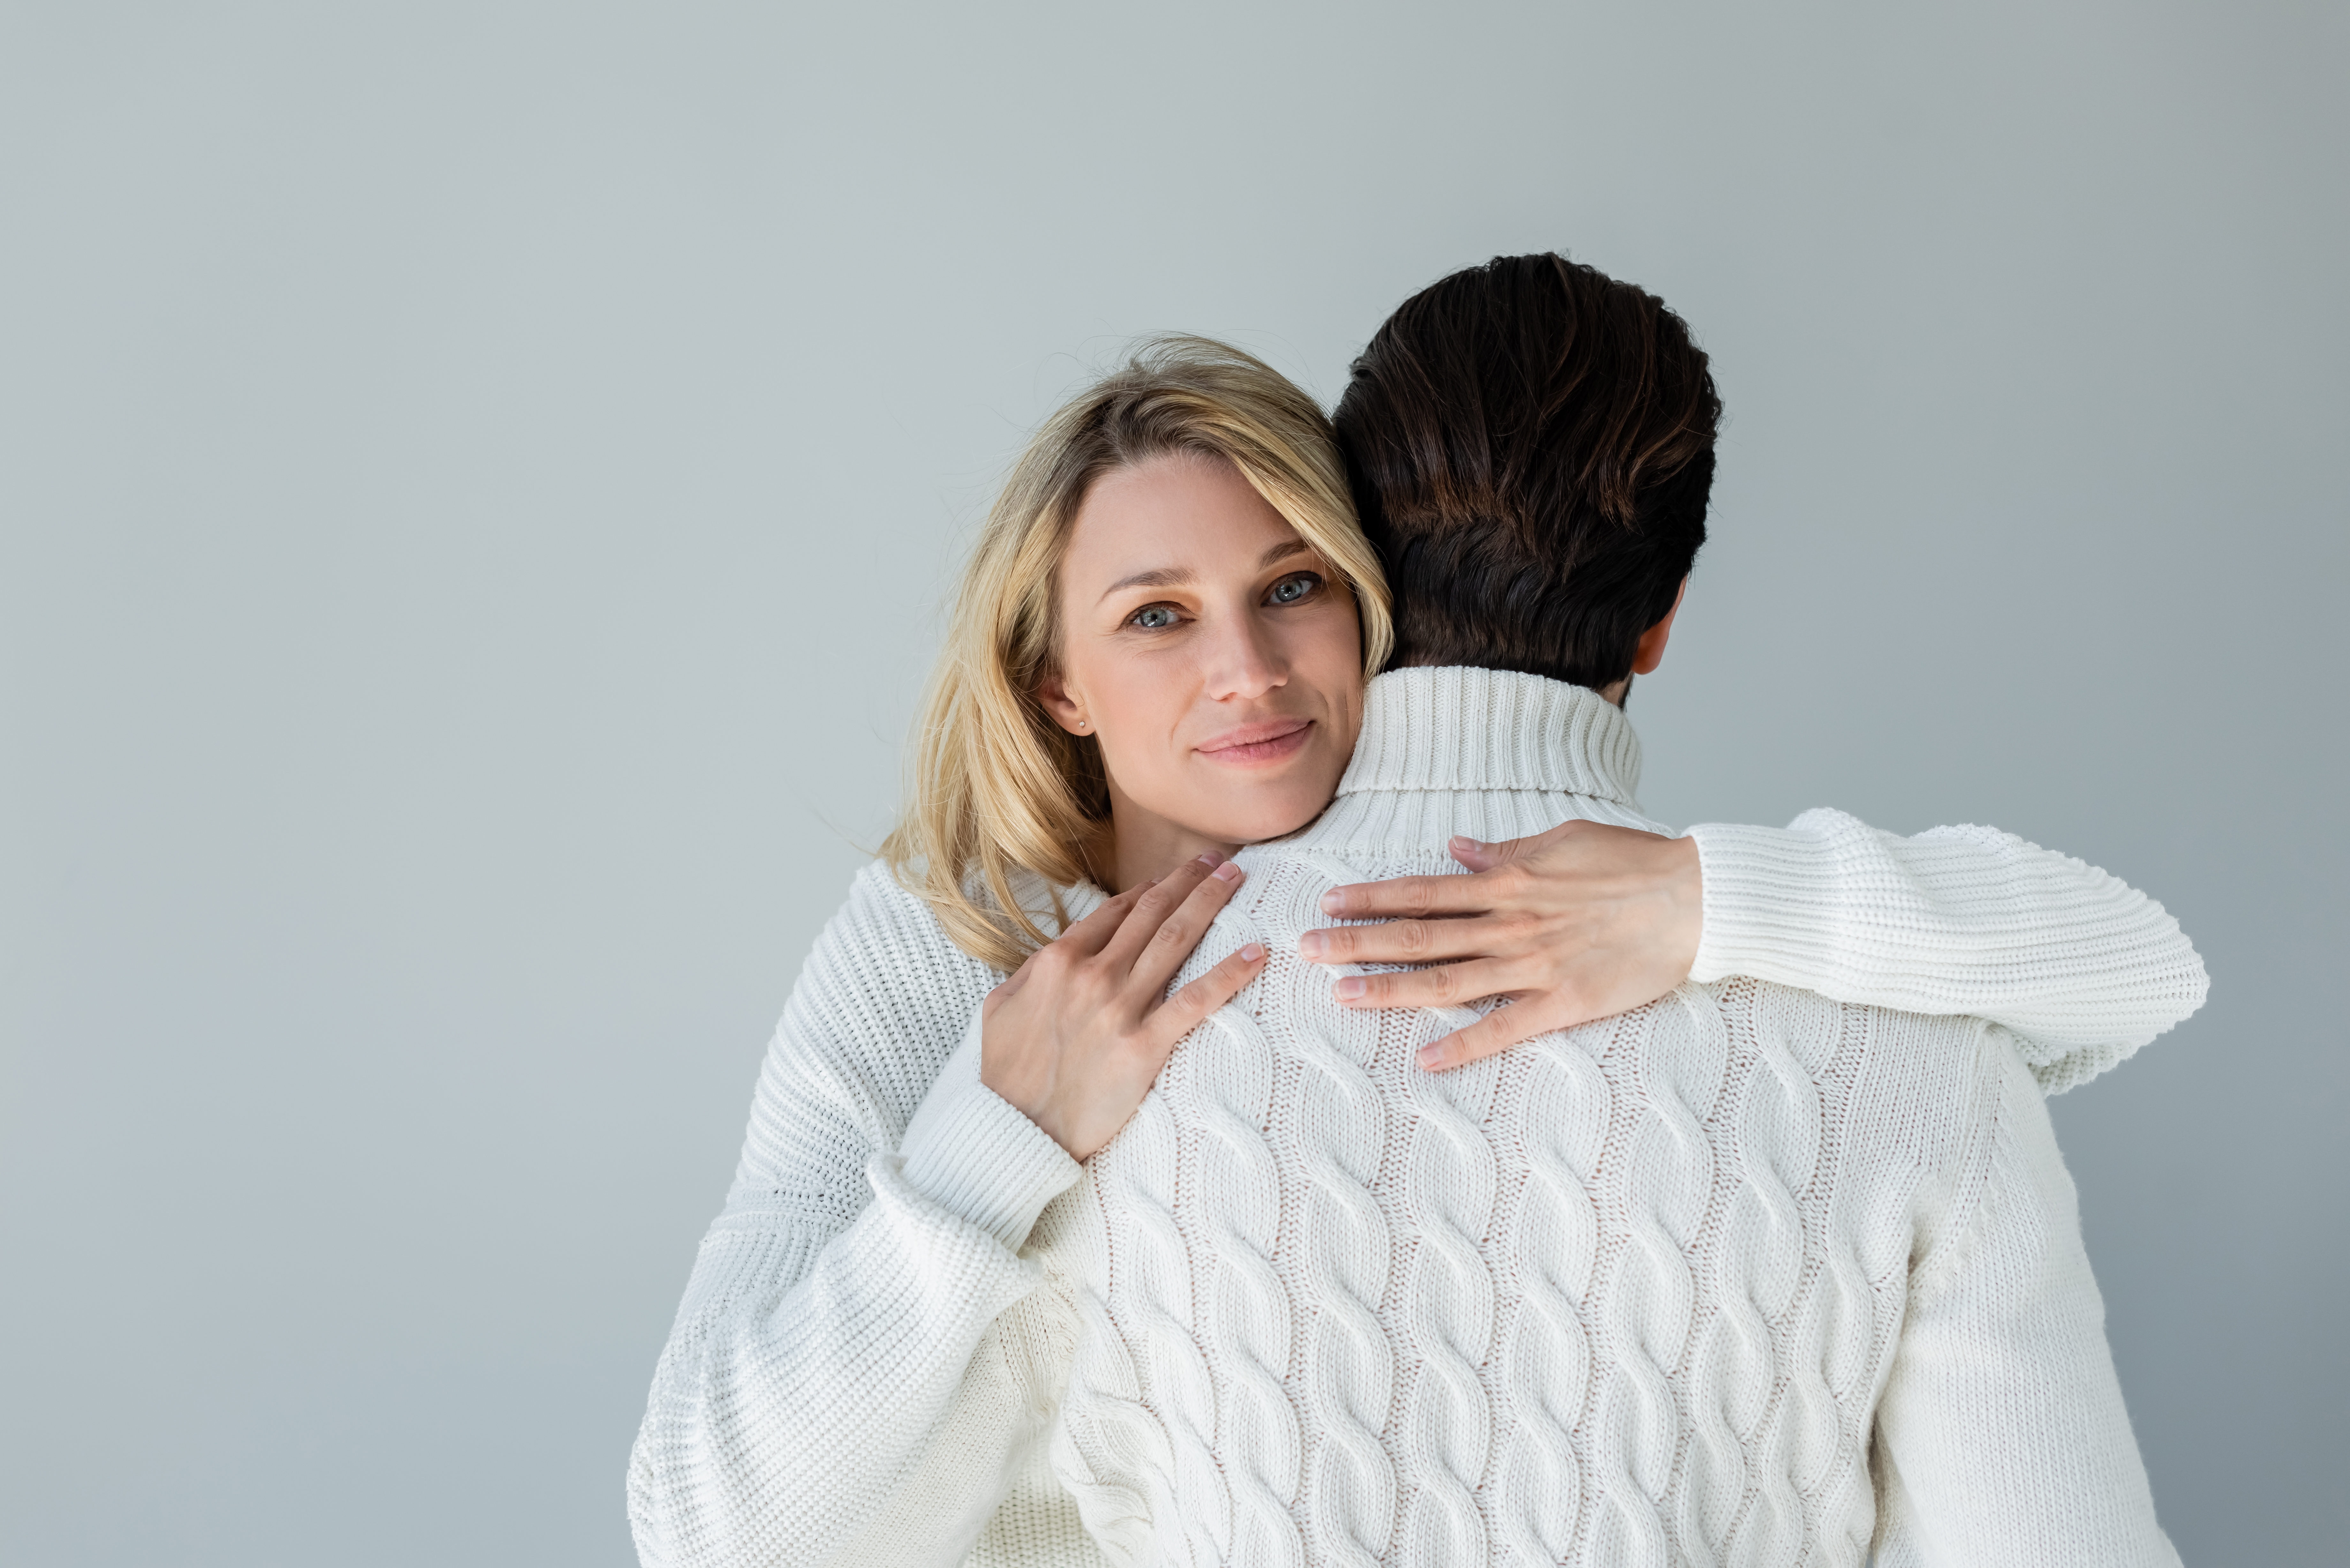 blonde wWoman in white sweater hugging back of boyfriend and smiling. | Source: Shutterstock